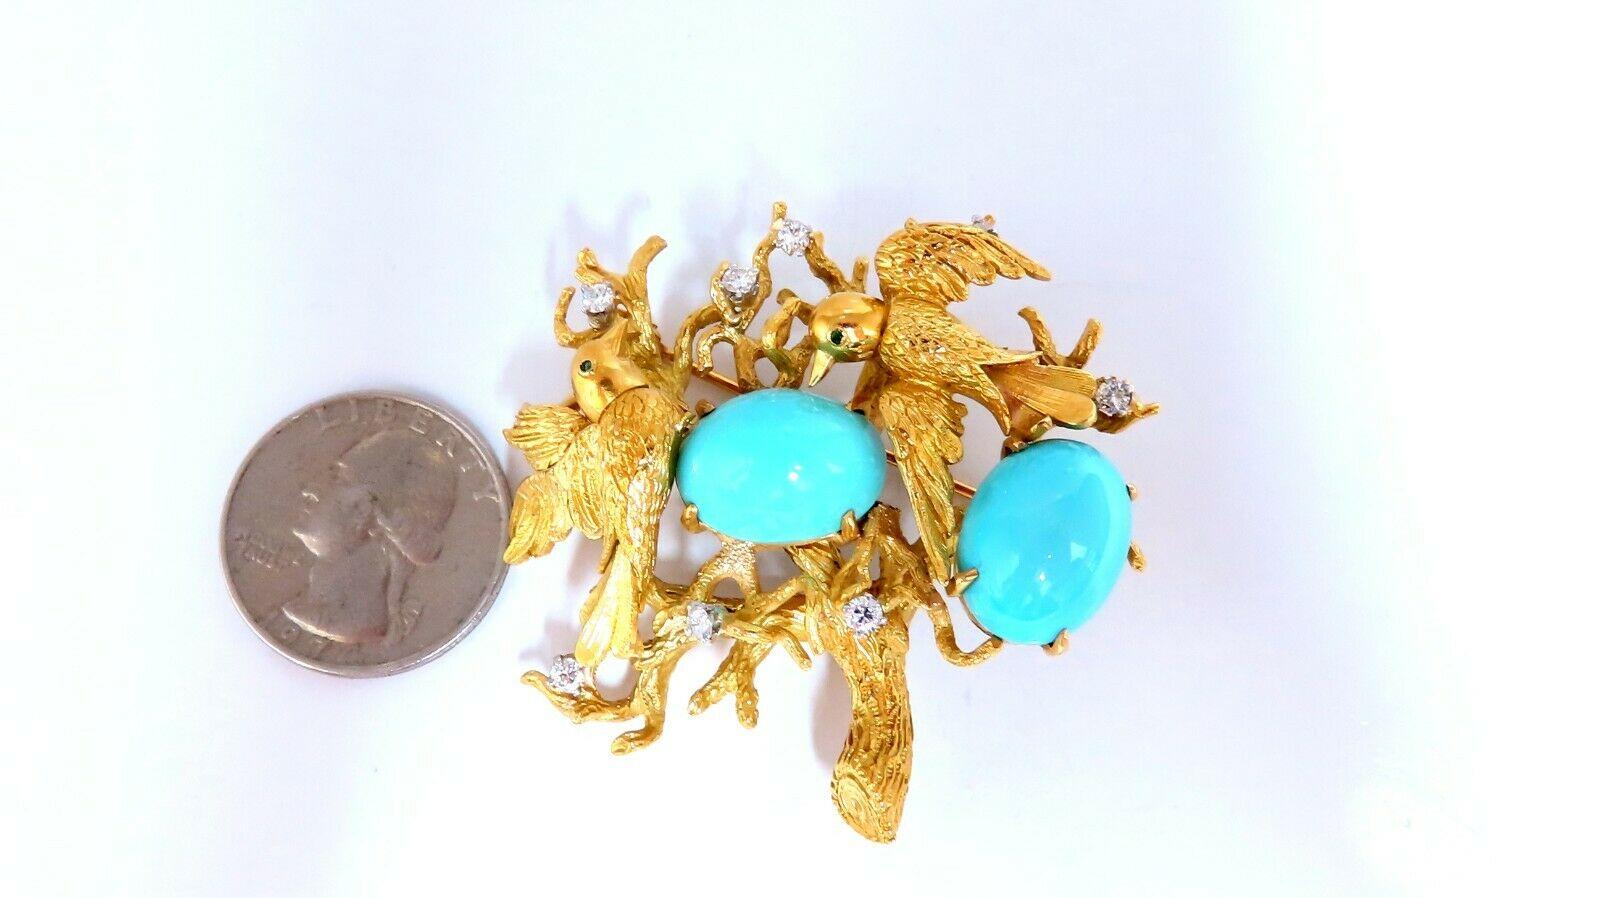 Uncut Vintage Bird Nest Eggs 20ct Turquoise 18kt Brooch High Intricate For Sale